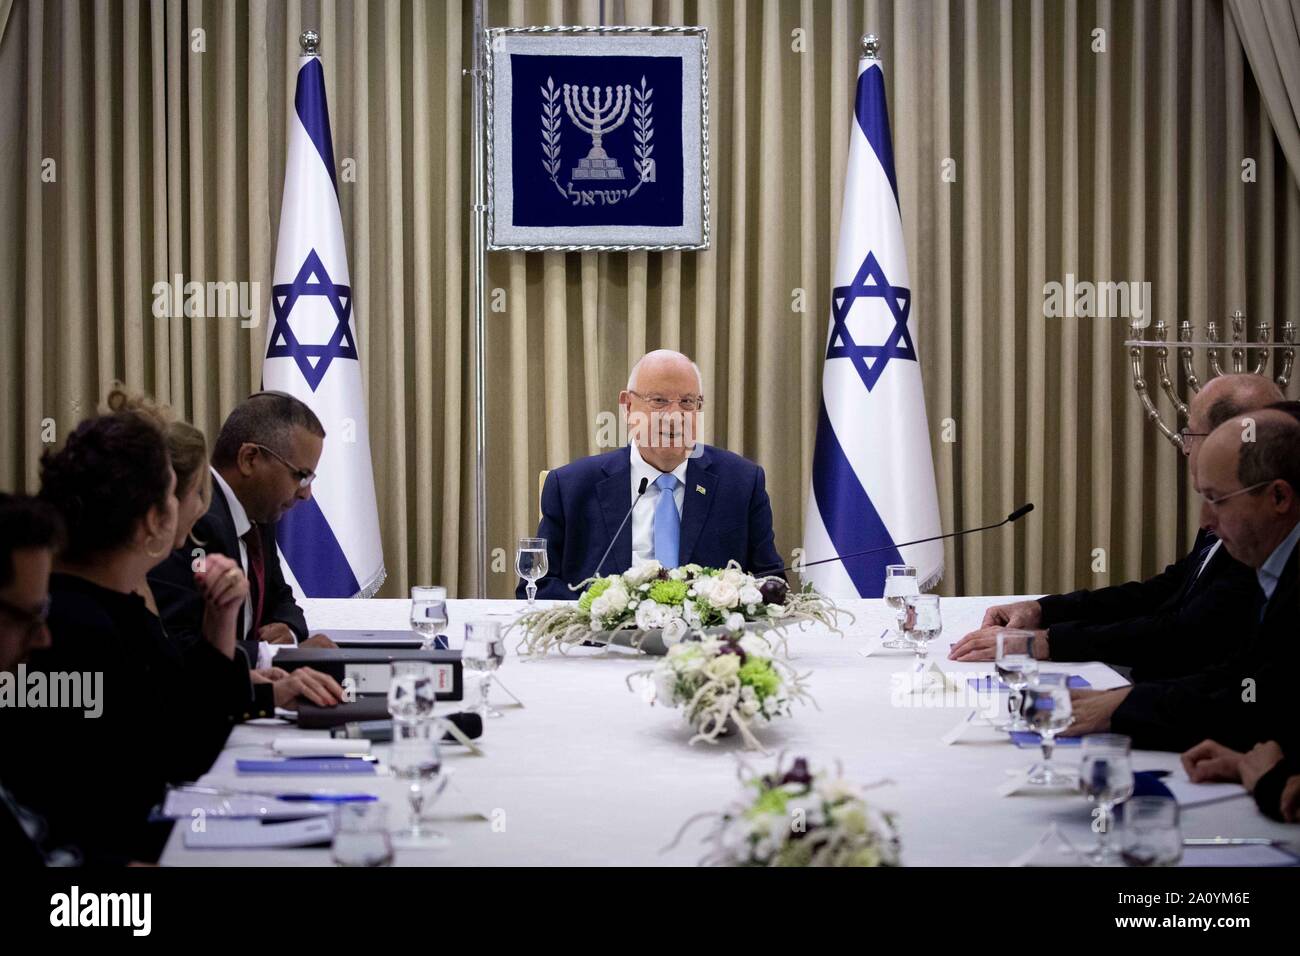 (190922) -- JERUSALEM, Sept. 22, 2019 (Xinhua) -- Israeli President Reuven Rivlin (C) meets with members of the Blue and White party at the President's Residence in Jerusalem, on Sept. 22, 2019. Israeli President Reuven Rivlin began on Sunday consultations with all elected parties before he decides the person who will be tasked with forming Israel's next government amid post-election political stalemate. (Yonatan Sindel/JINI via Xinhua) Stock Photo